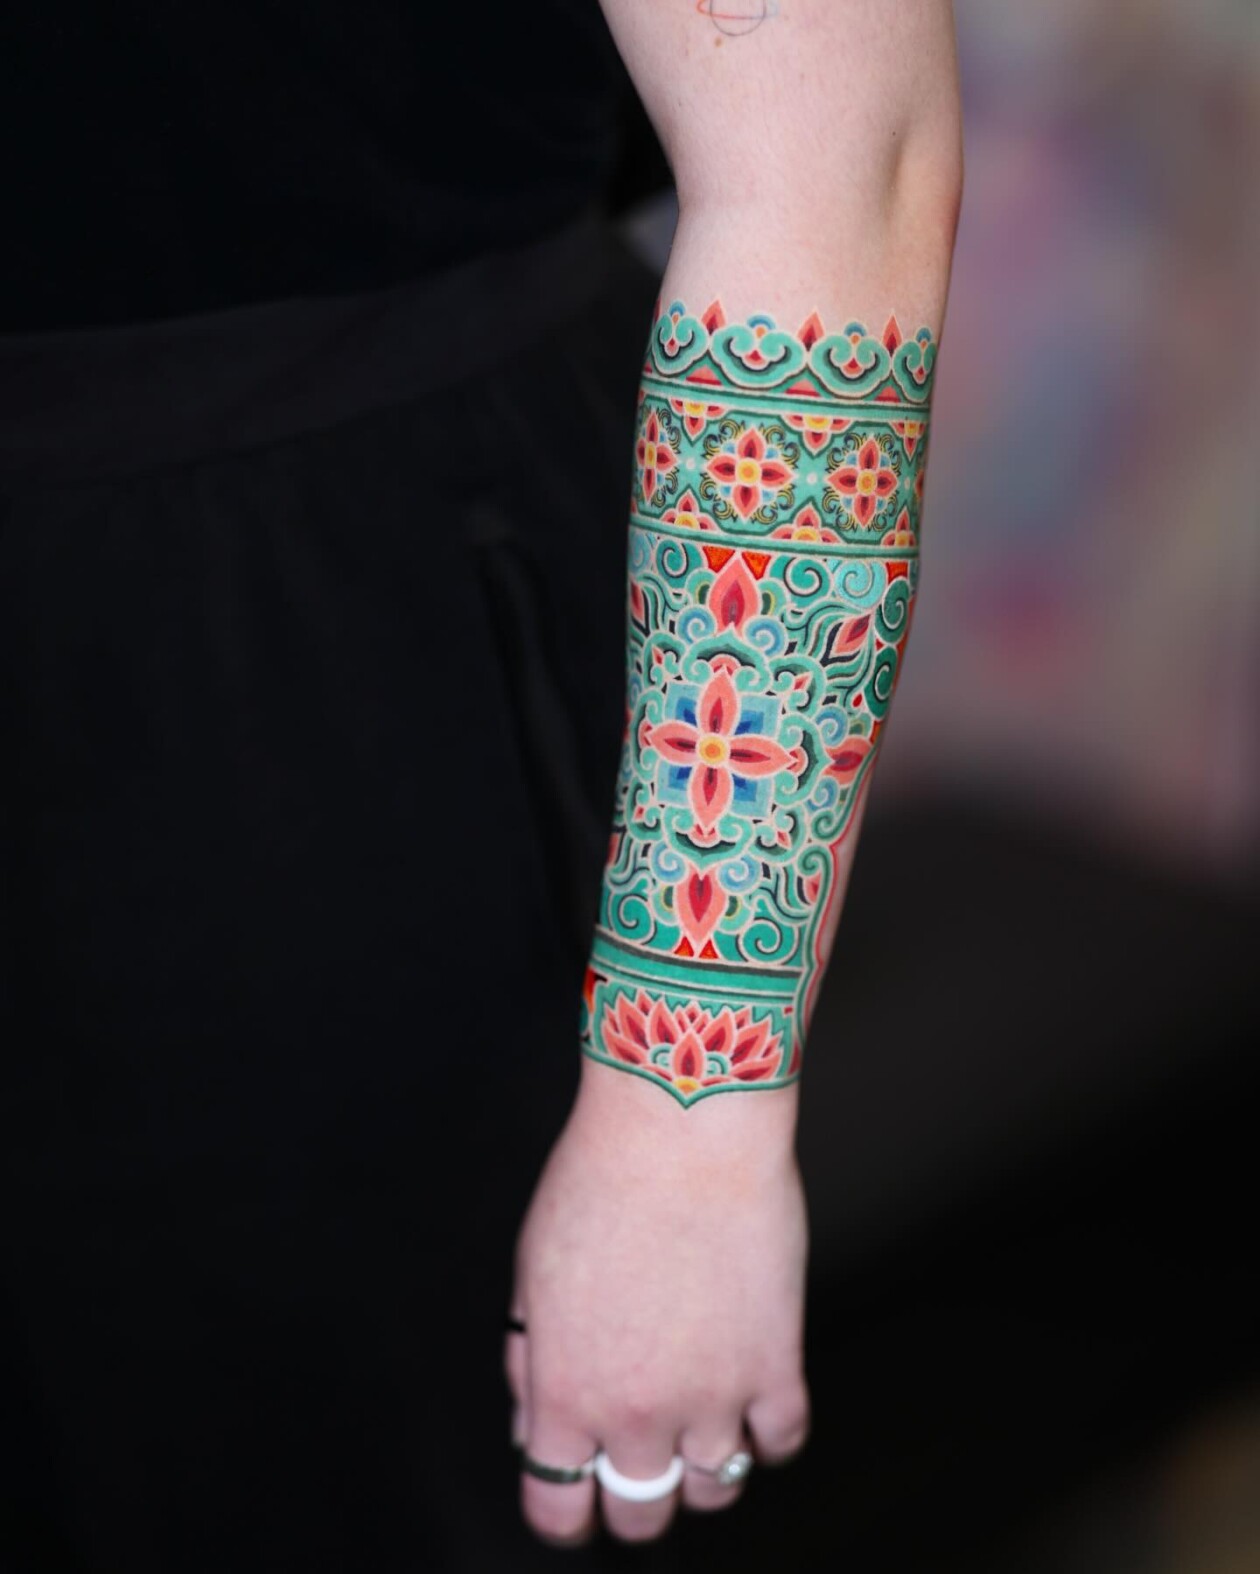 Vibrant Tattoos With Densely Layered Patterns By Korean Artist Pittakkm (9)